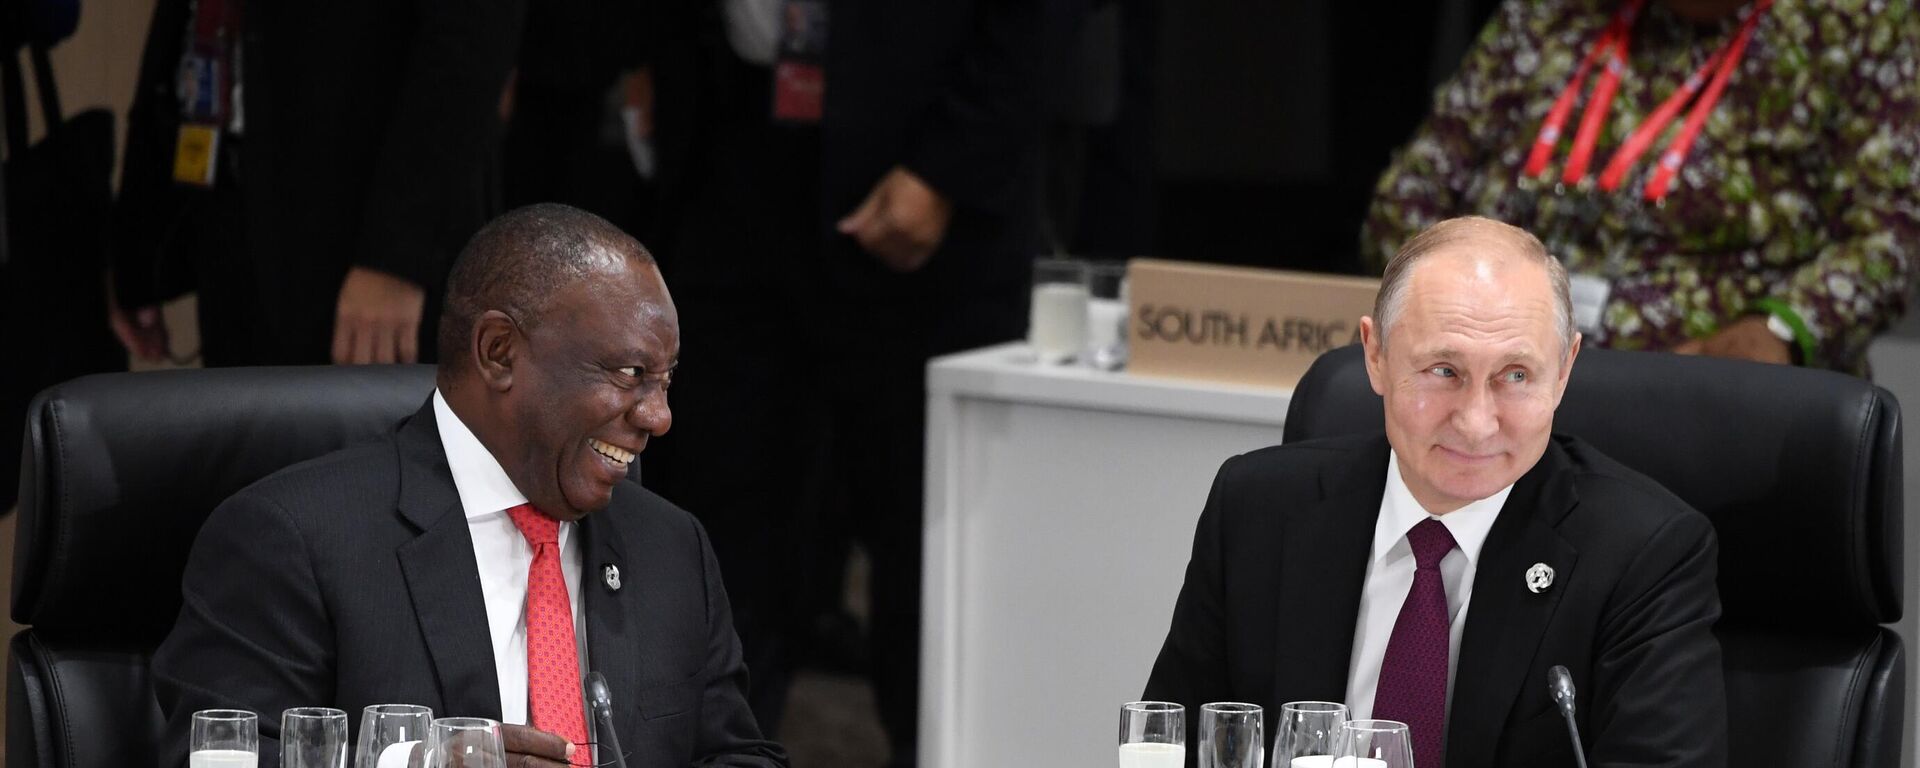 Russian President Vladimir Putin at the first working meeting of the heads of delegations of the G20 member states, invited states and international organizations in Osaka. Left: President of the Republic of South Africa Cyril Ramaphosa. - Sputnik Africa, 1920, 08.06.2023